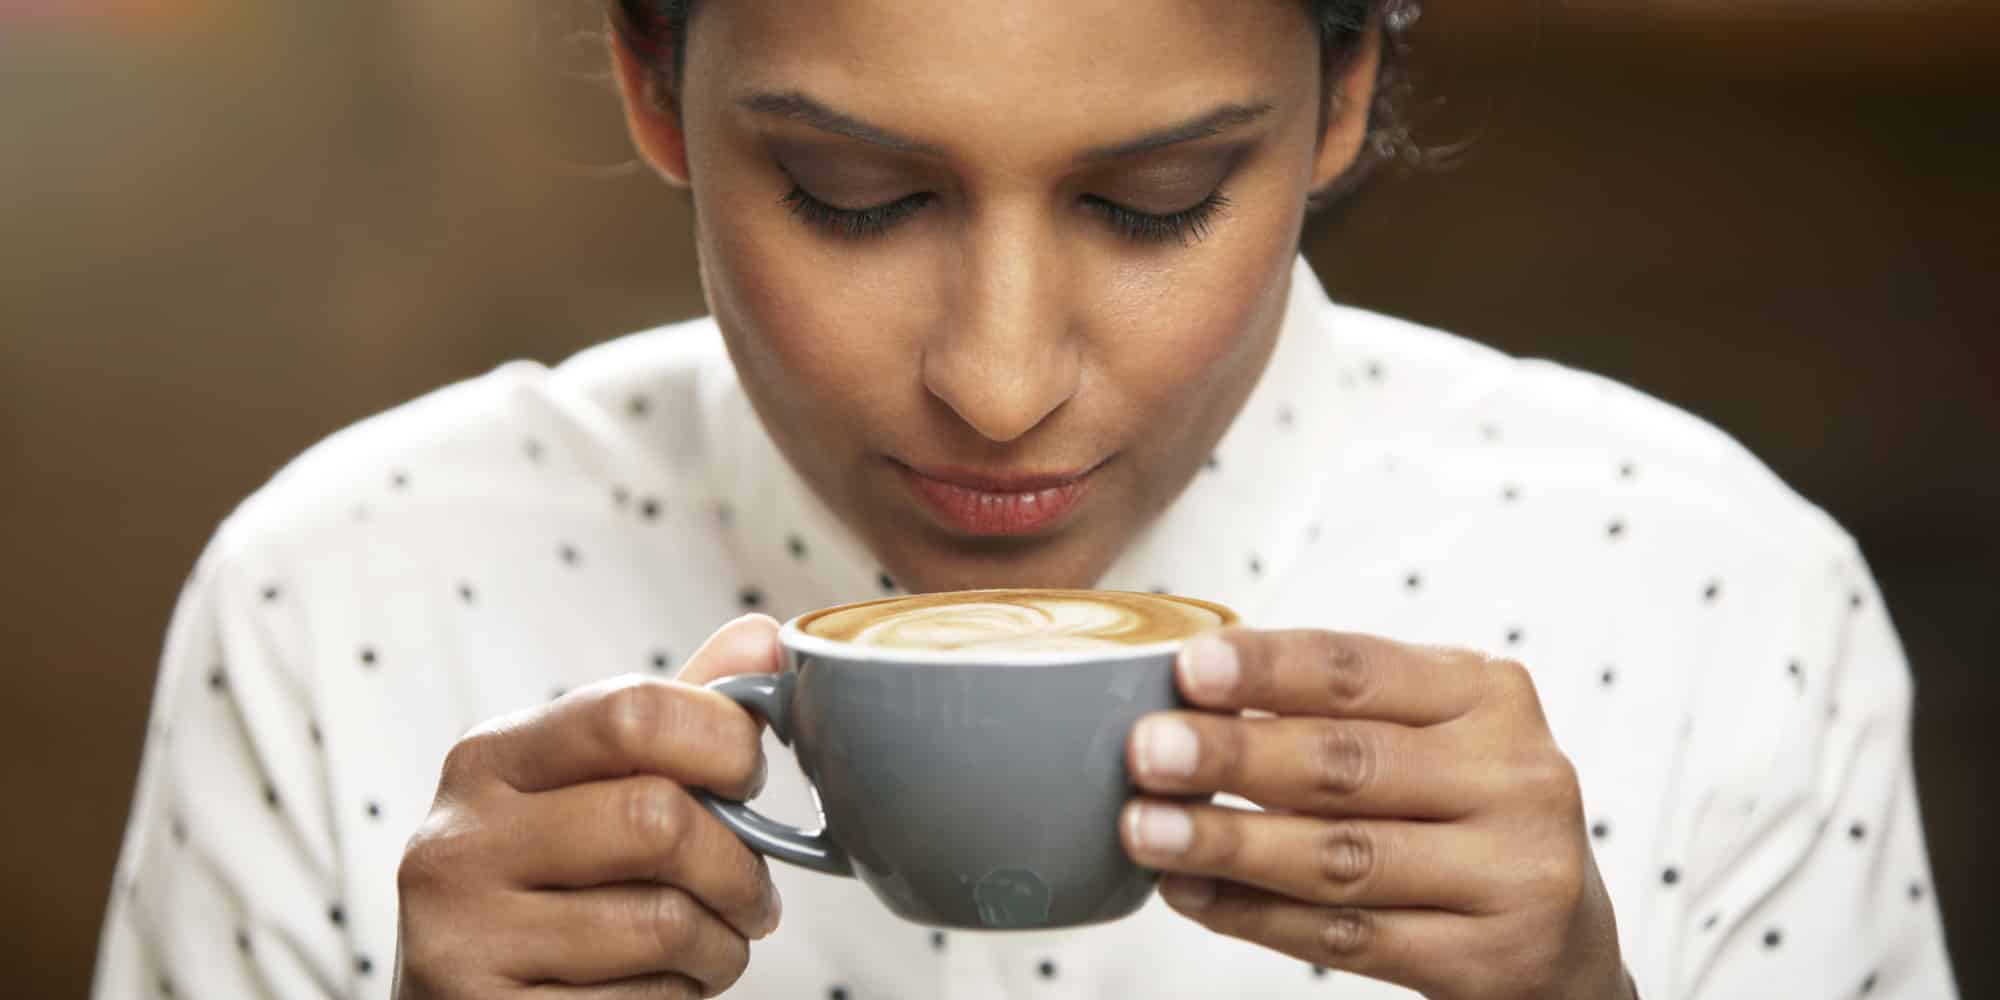 Woman about to drink a cup of coffee.